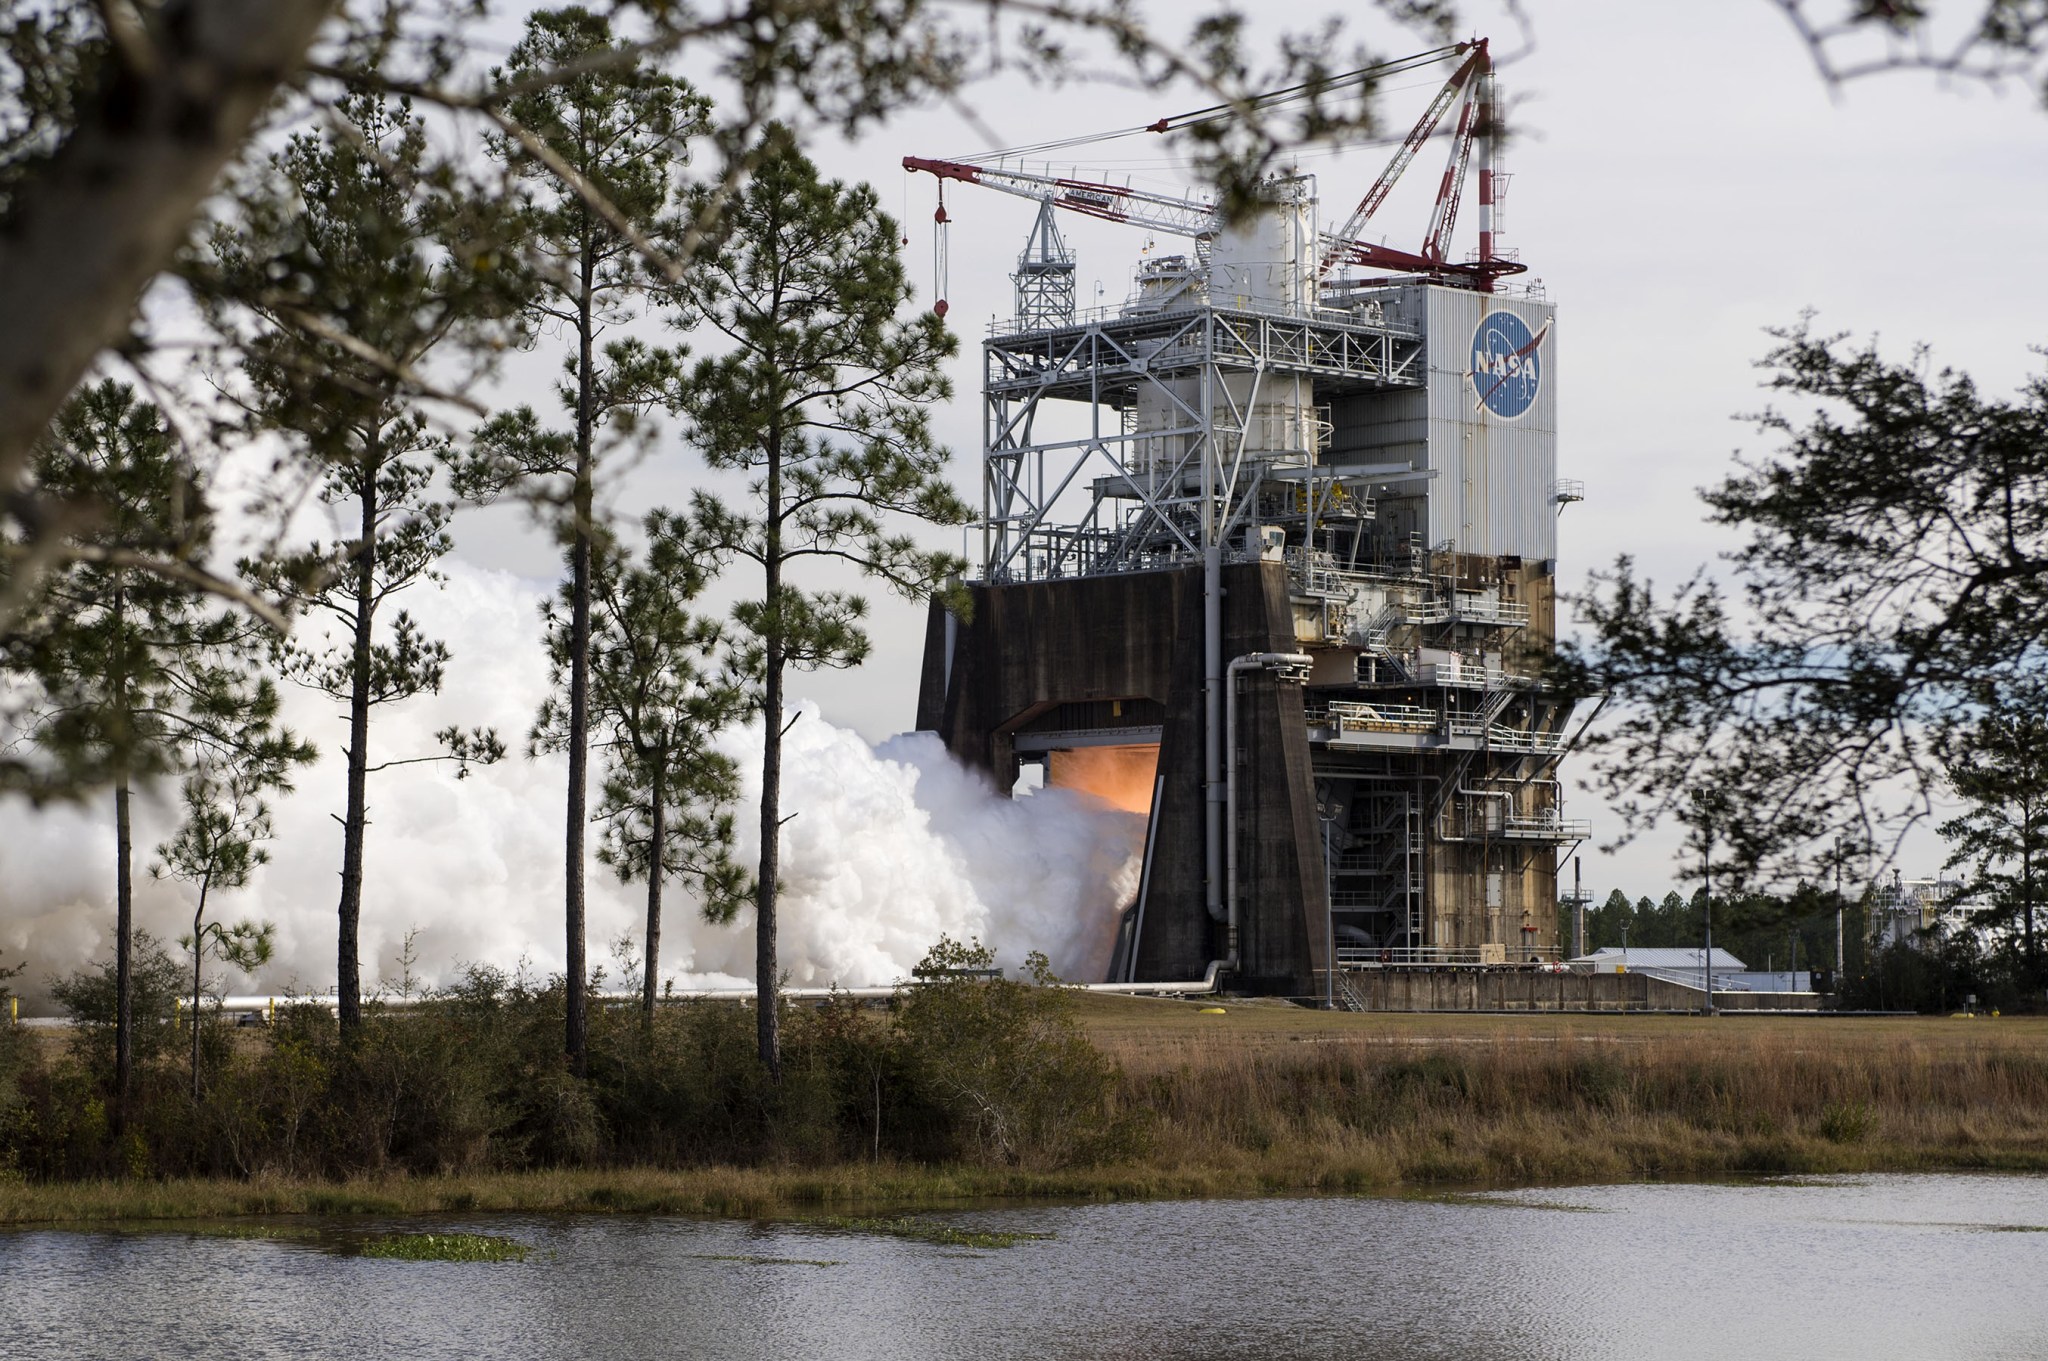 Successful hot-fire test of an RS-25 on December 13, 2017